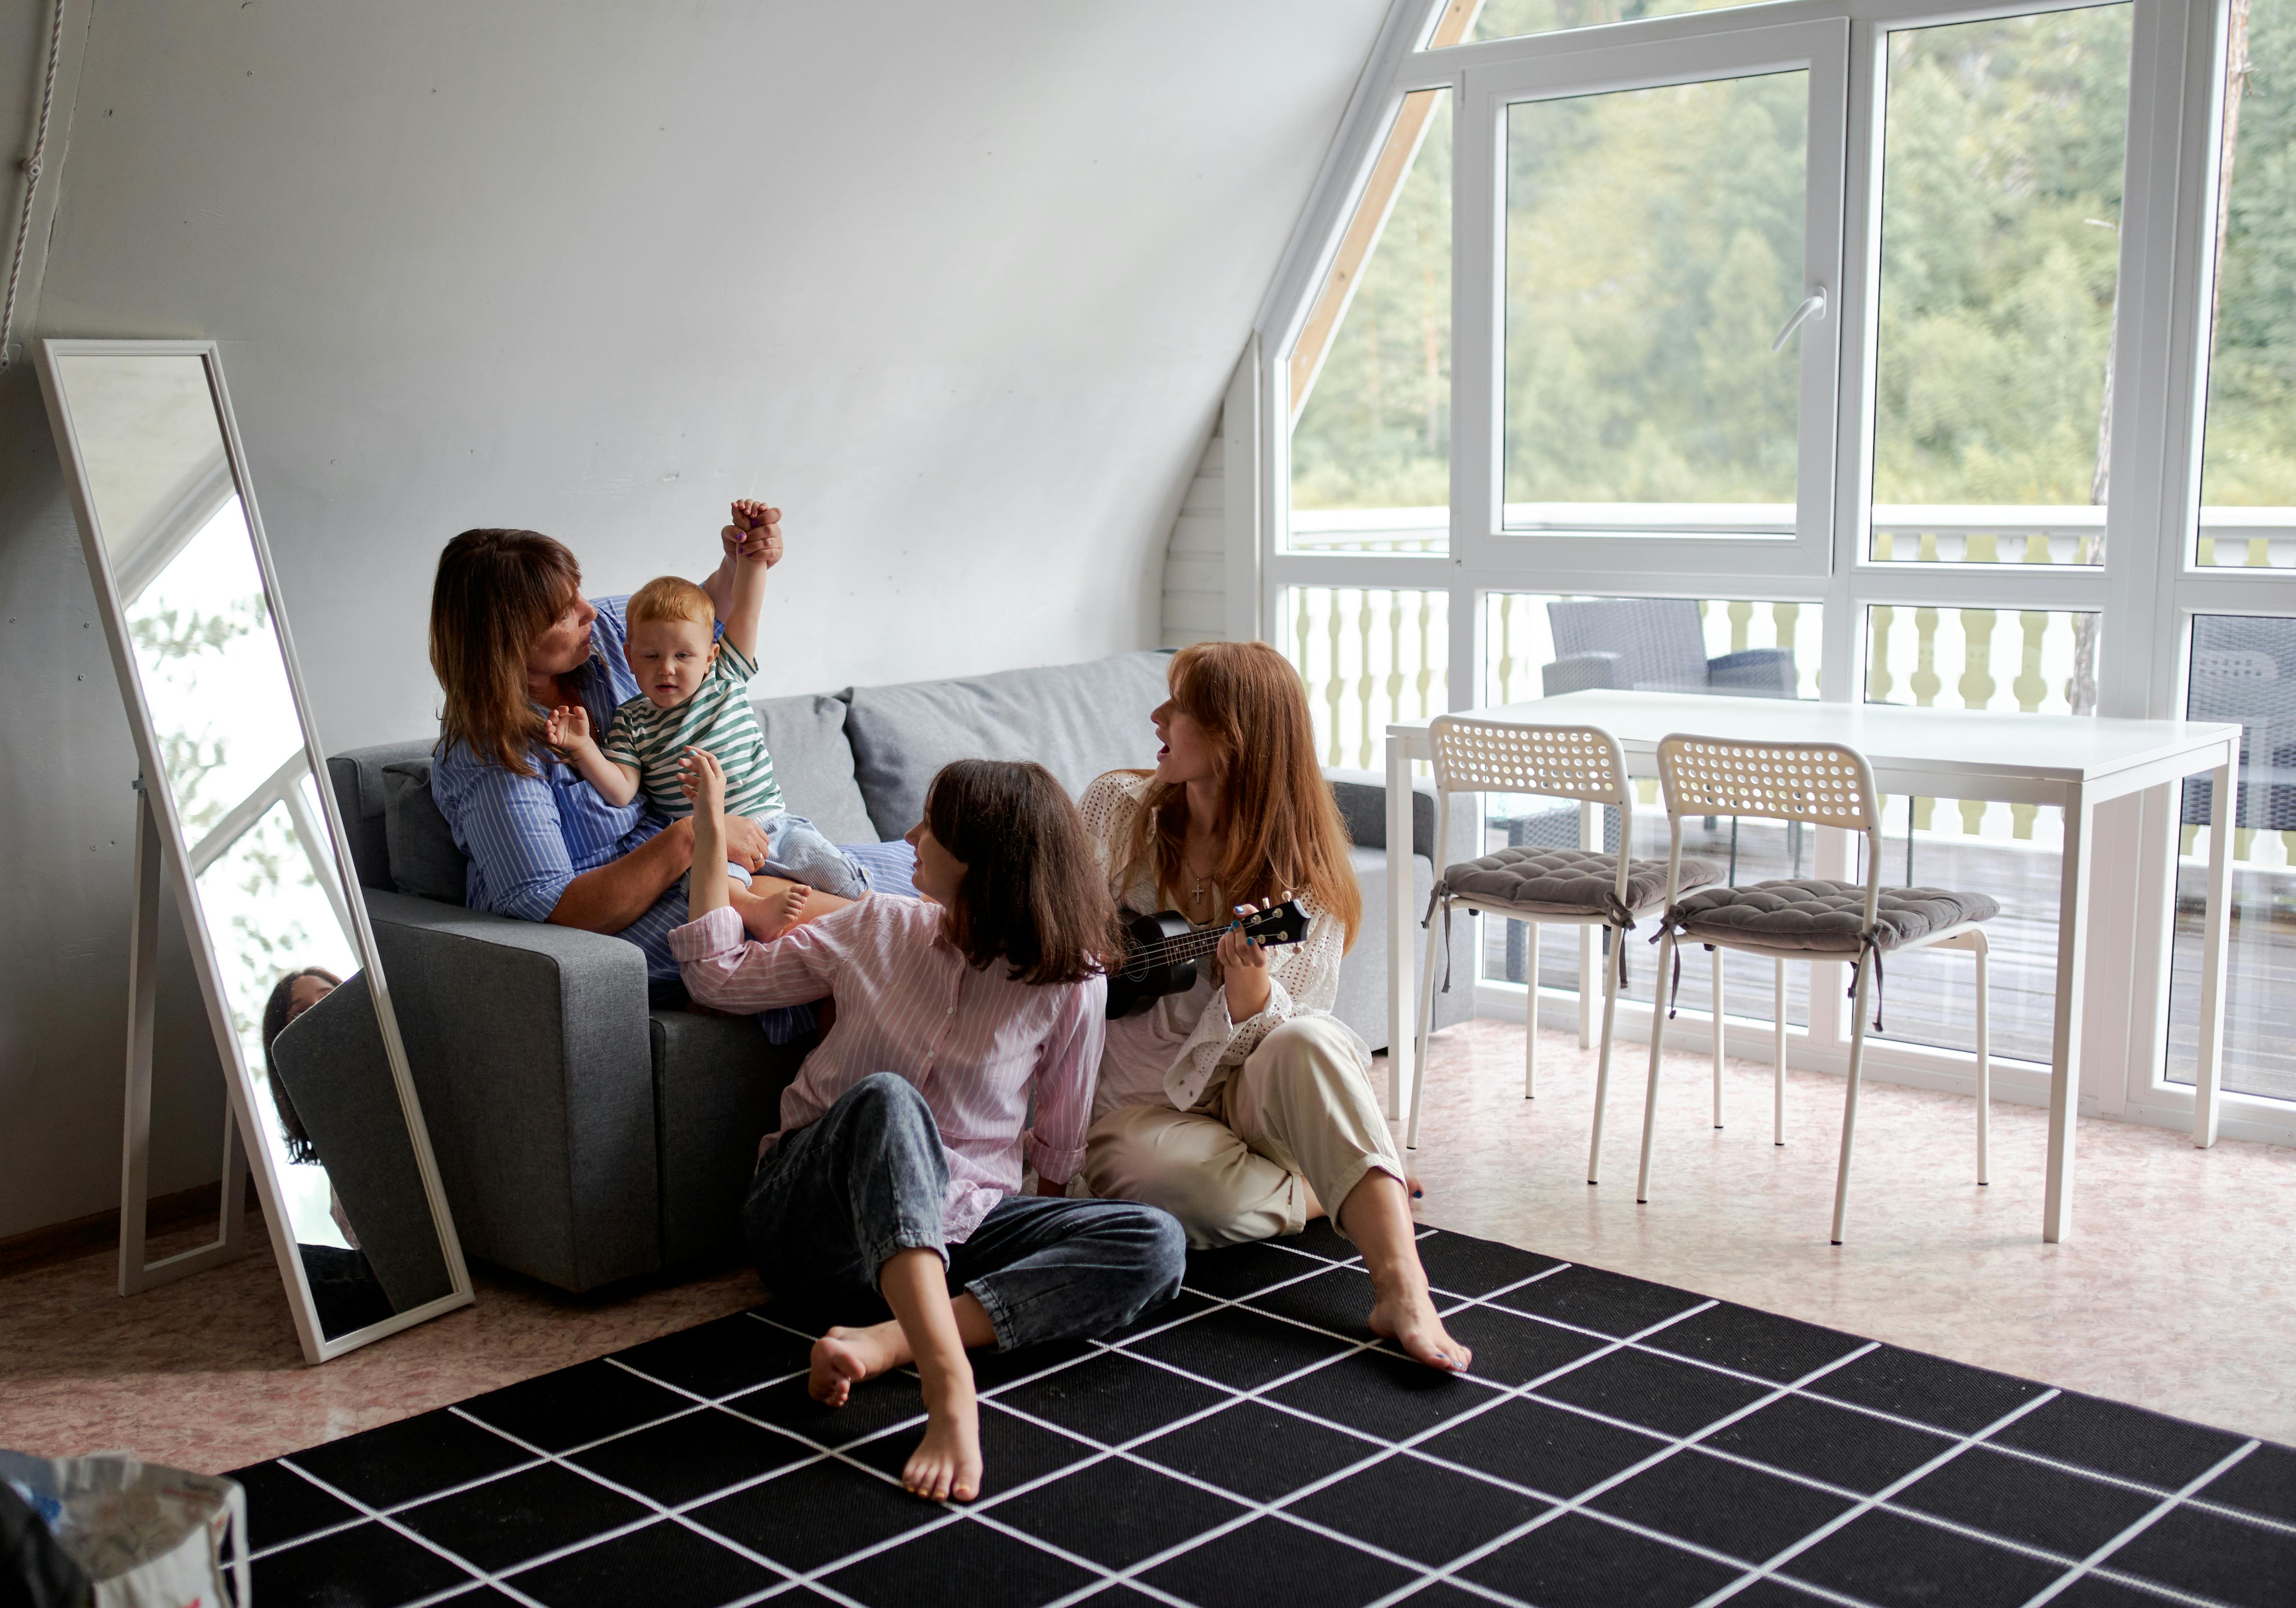 A happy family playing with a toddler | Source: Pexels